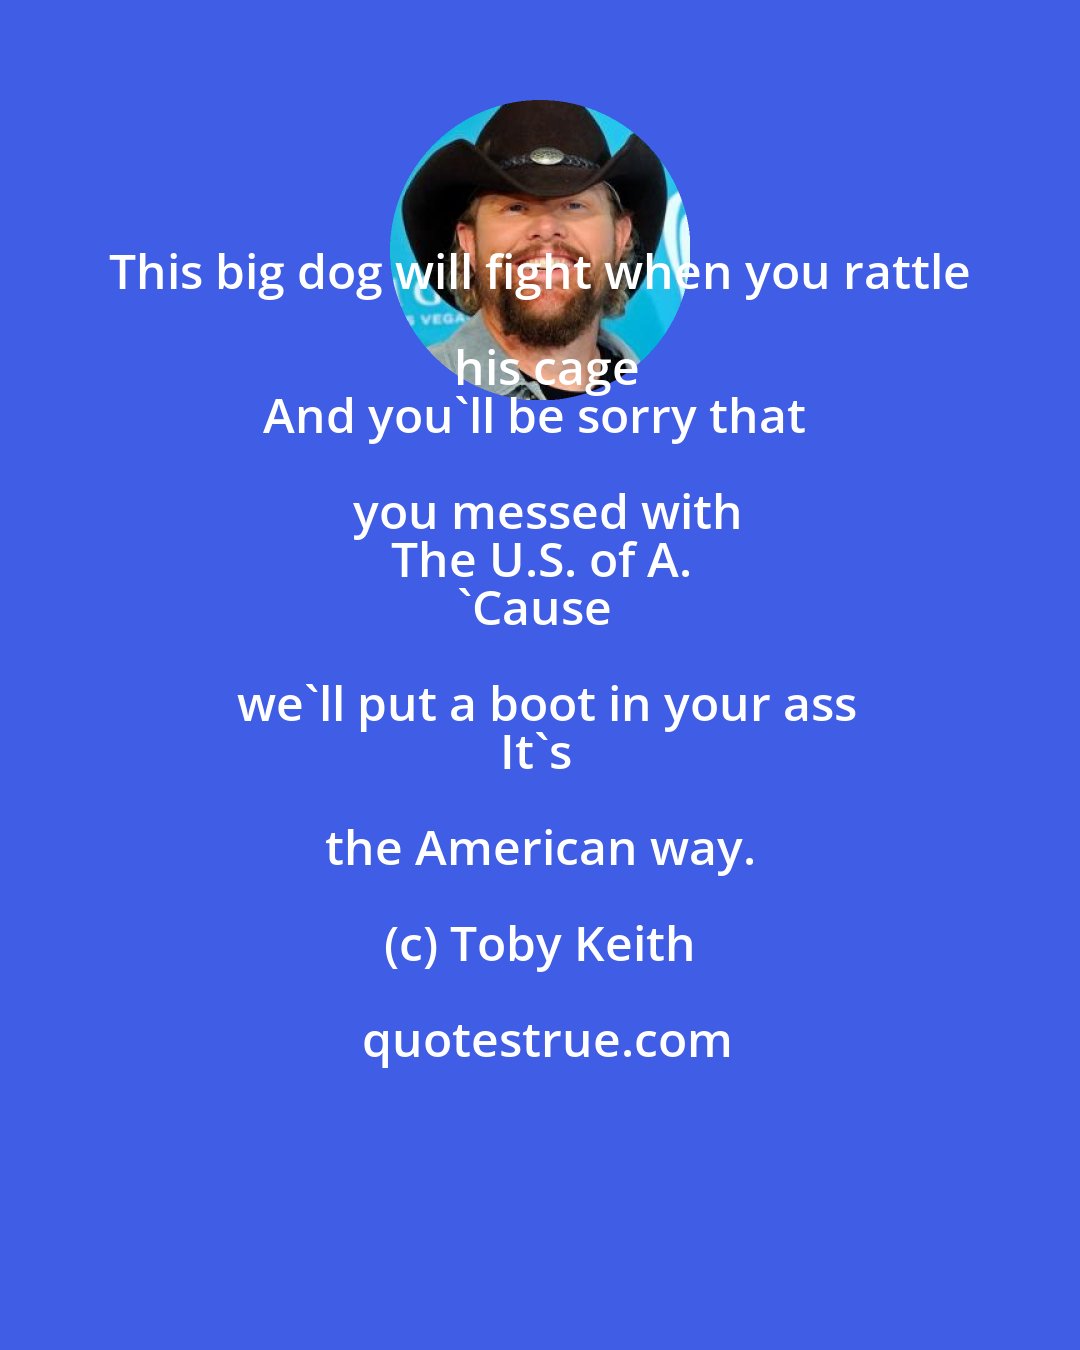 Toby Keith: This big dog will fight when you rattle his cage
And you'll be sorry that you messed with
The U.S. of A.
'Cause we'll put a boot in your ass
It's the American way.